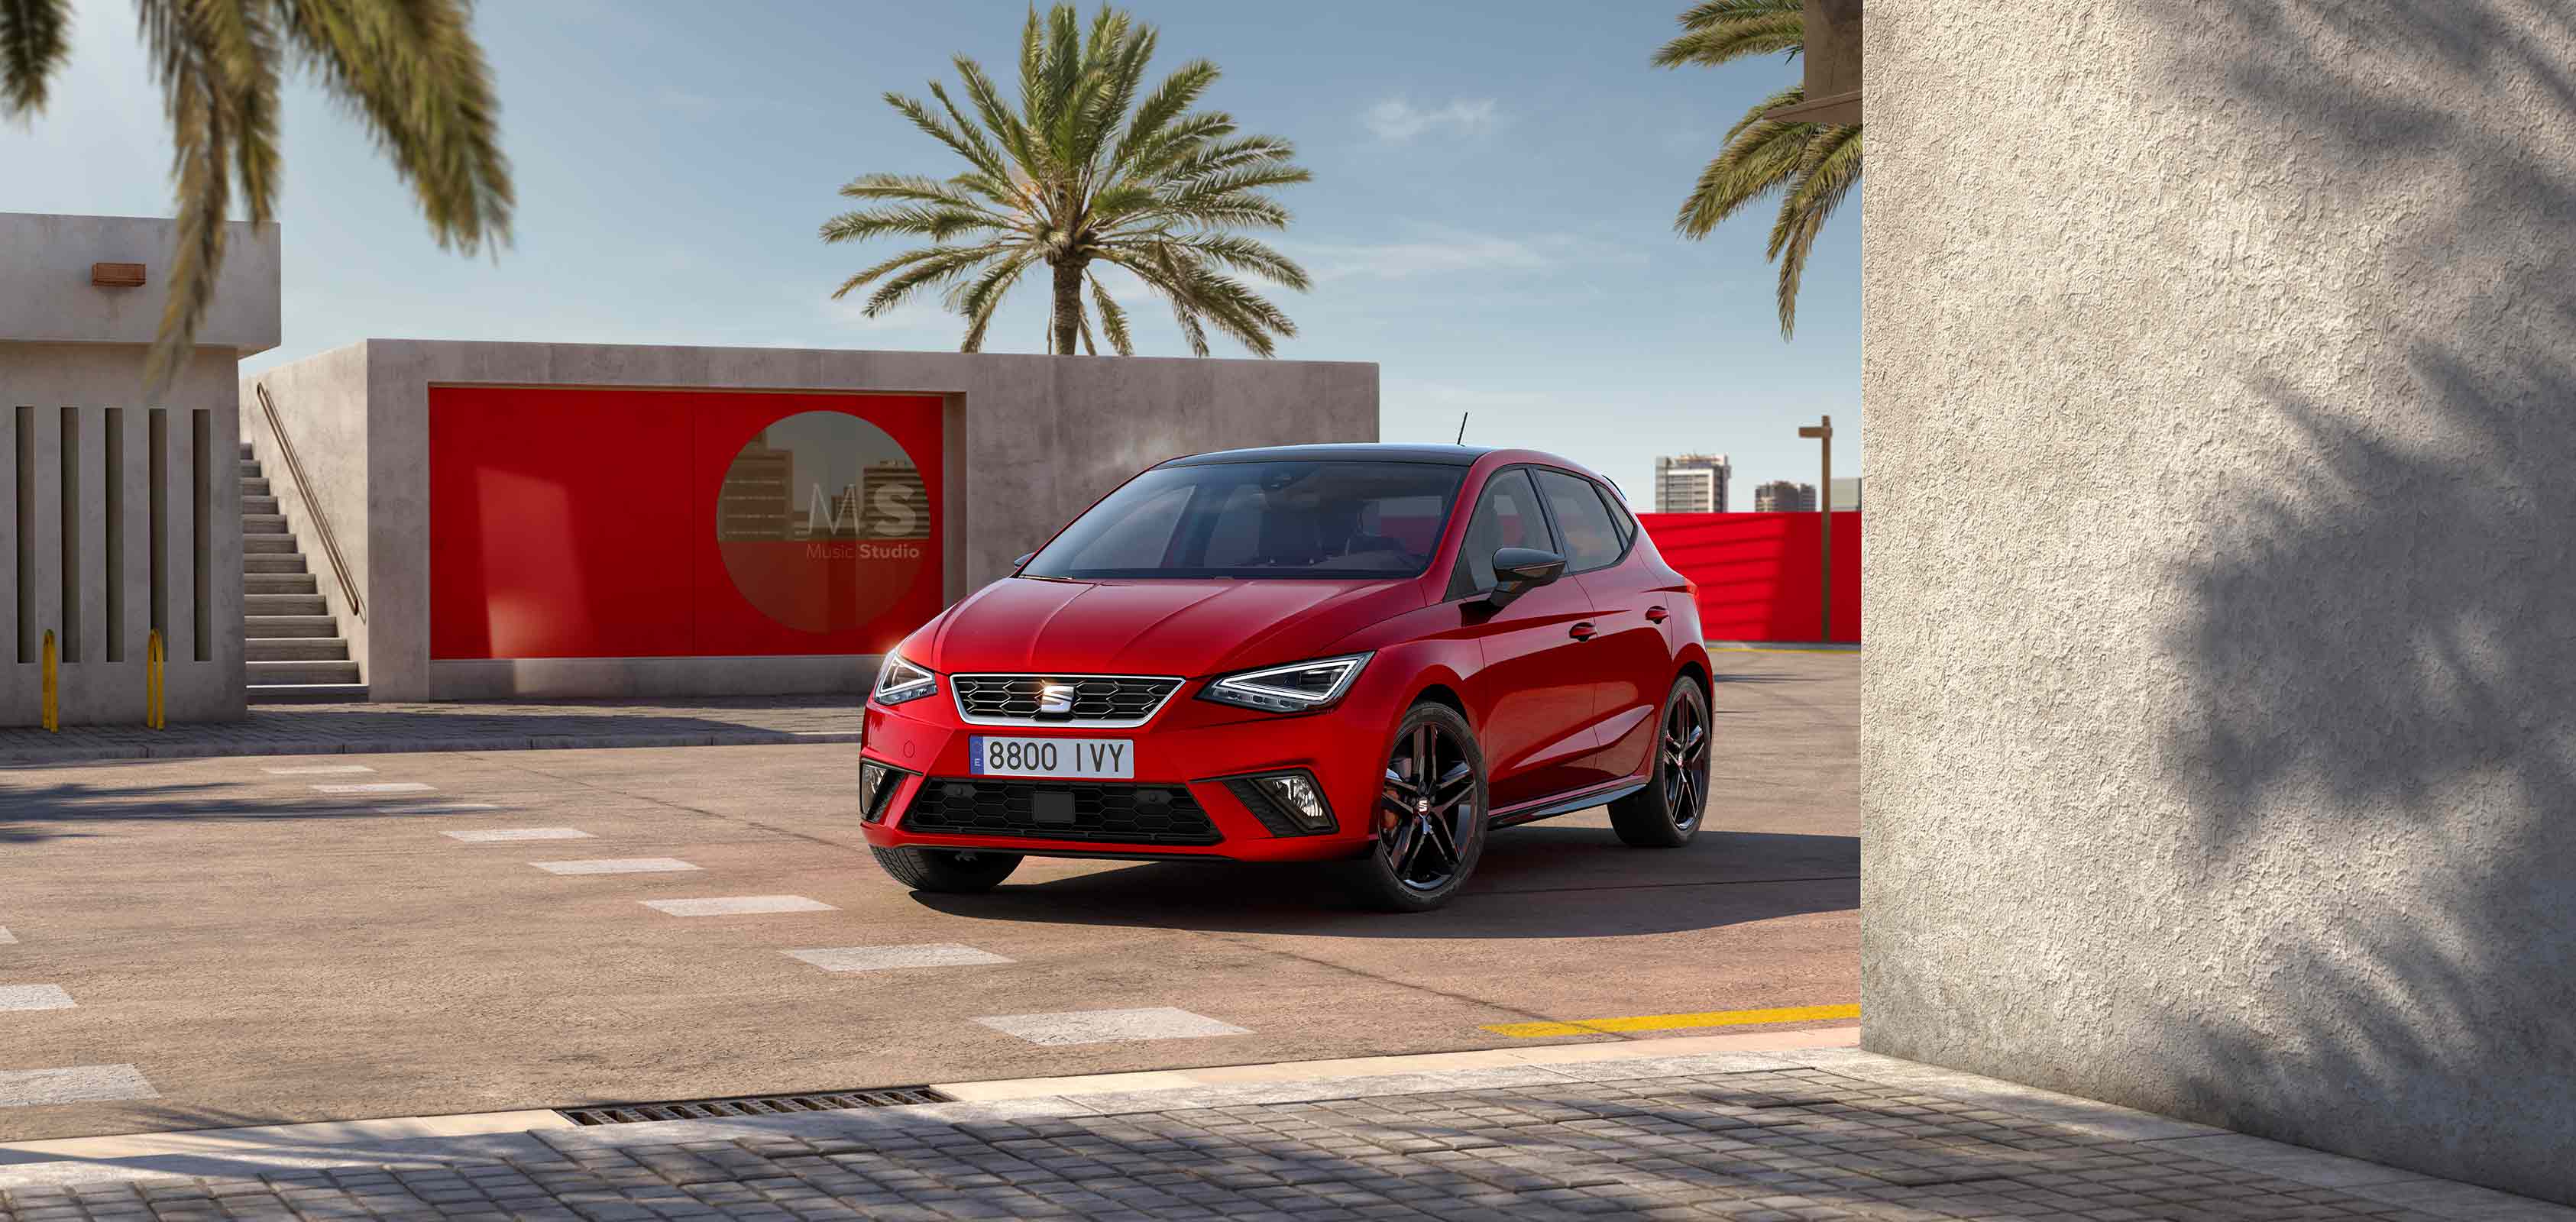  SEAT Ibiza desire red colour with alloy wheels